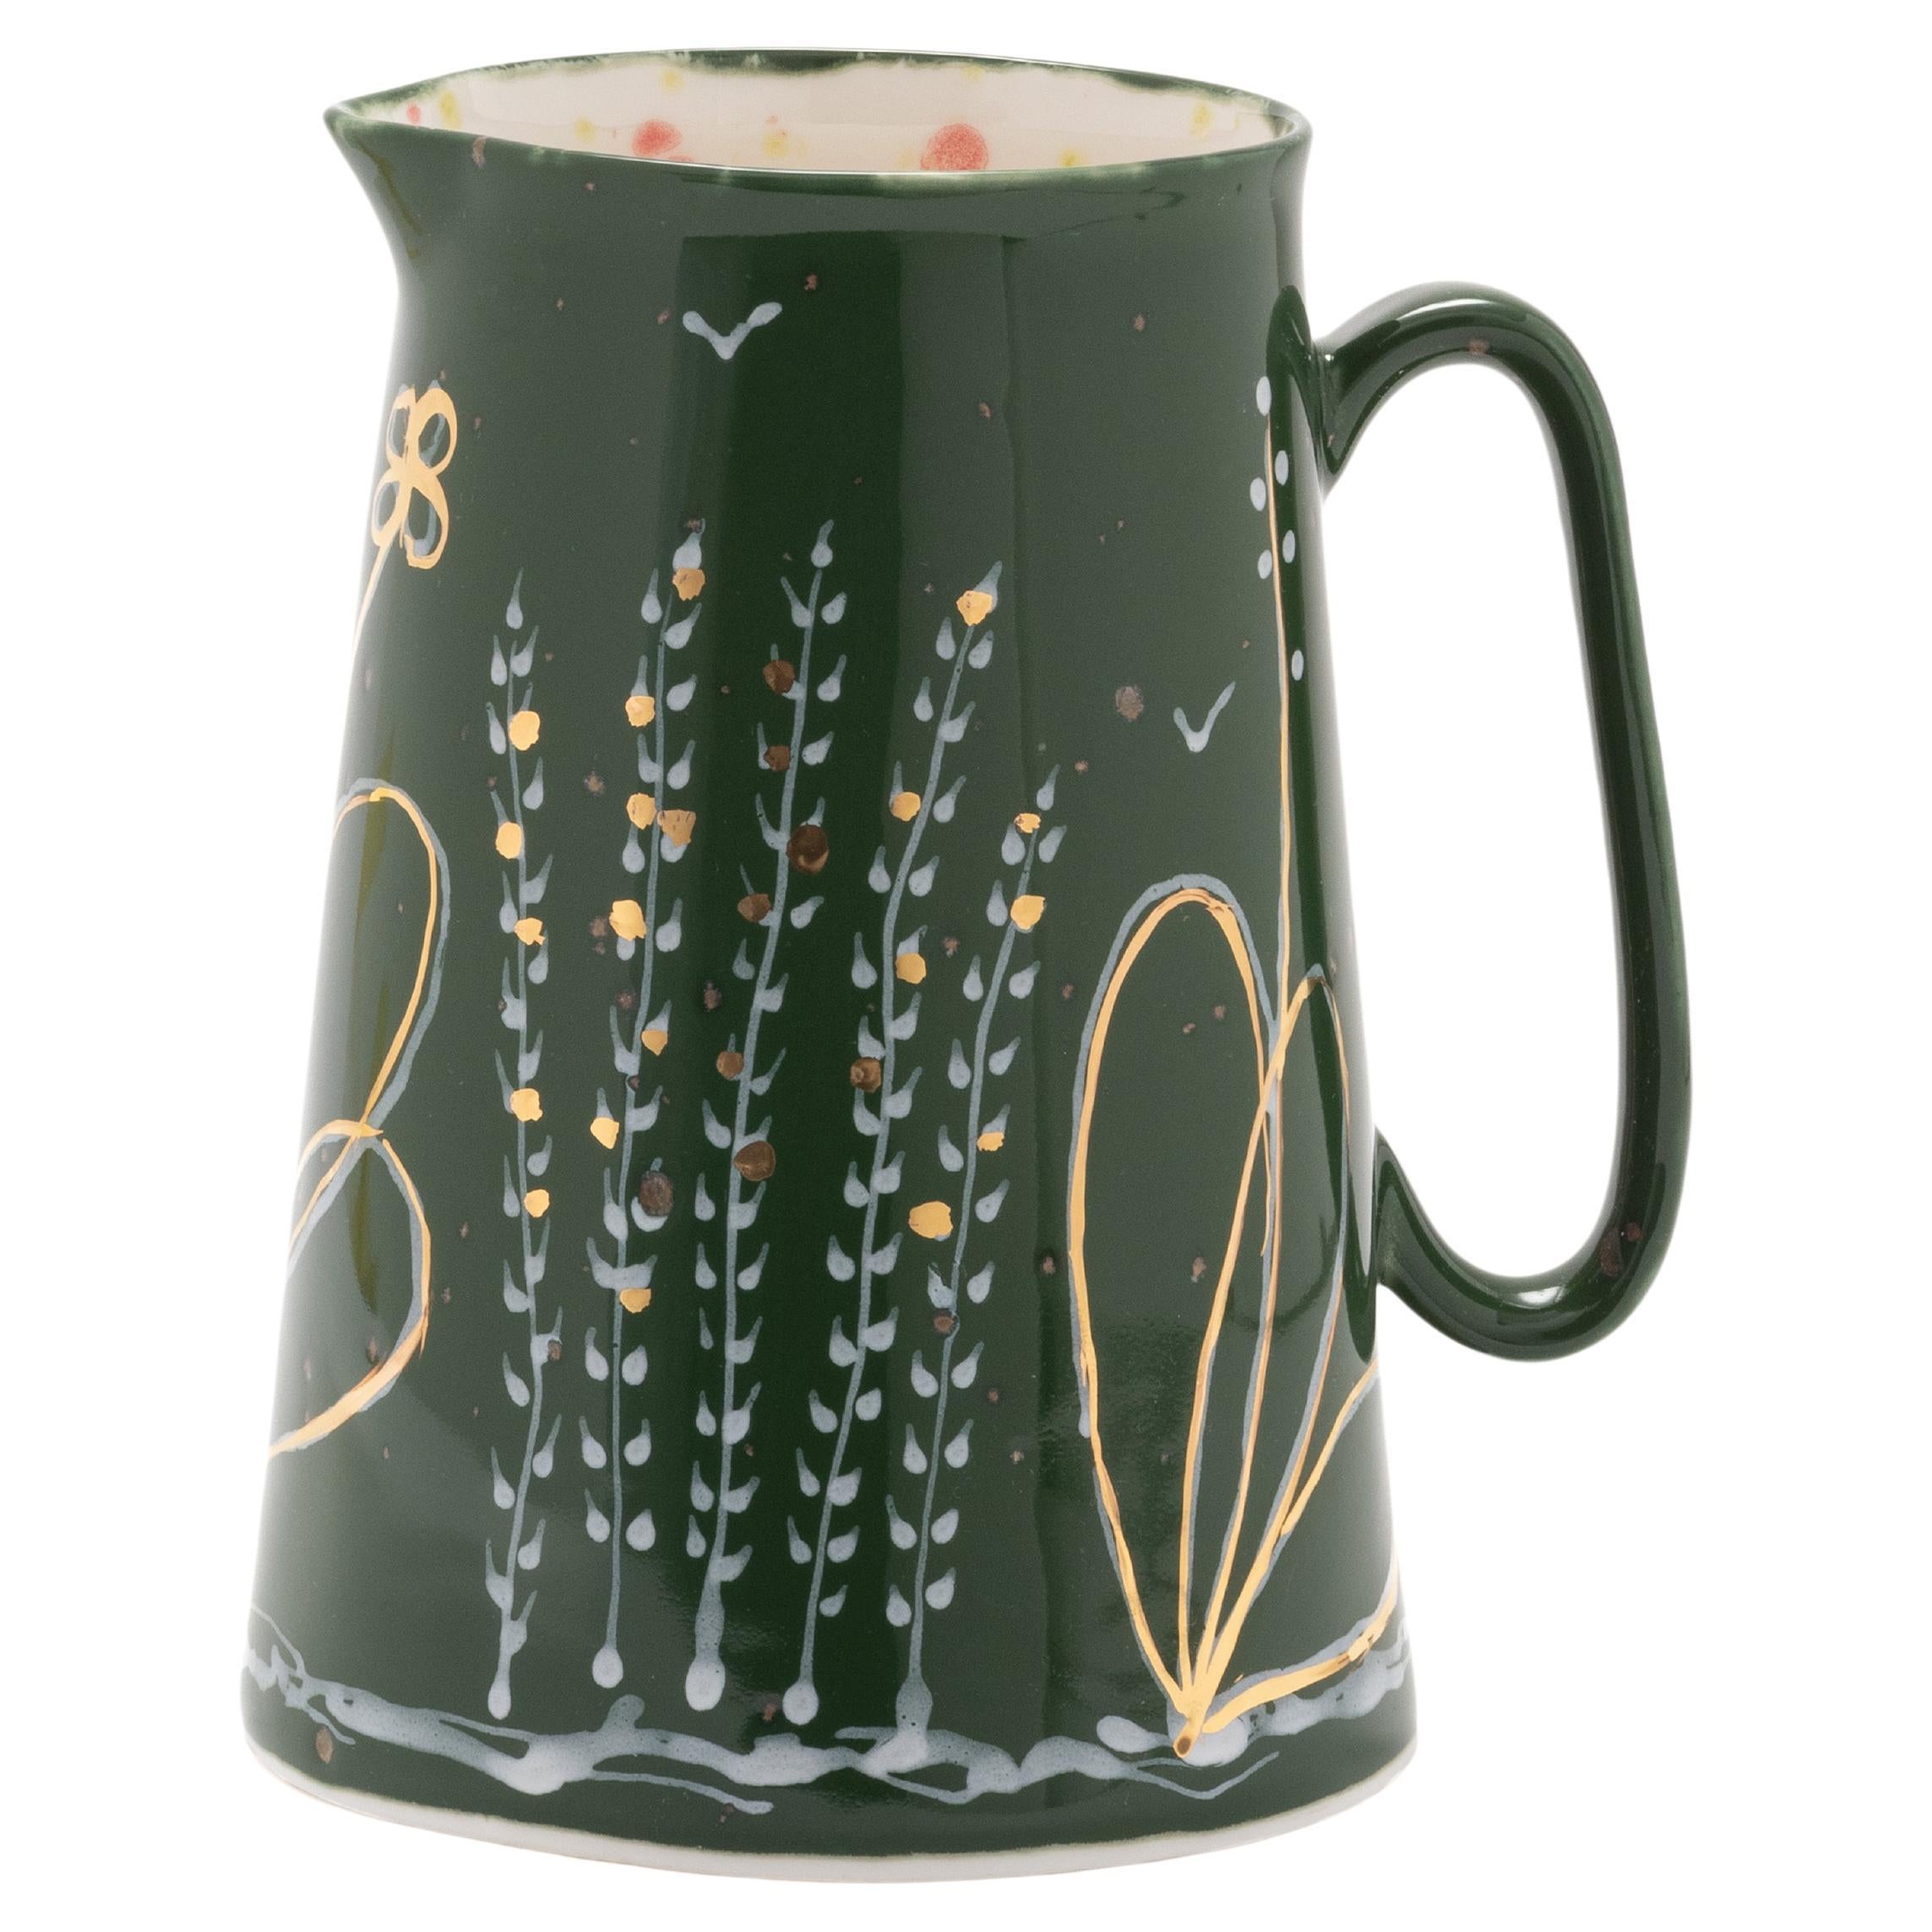 Contemporary Hand Decorated Porcelain 3 Pint Jug Pitcher, Made in Italy  For Sale